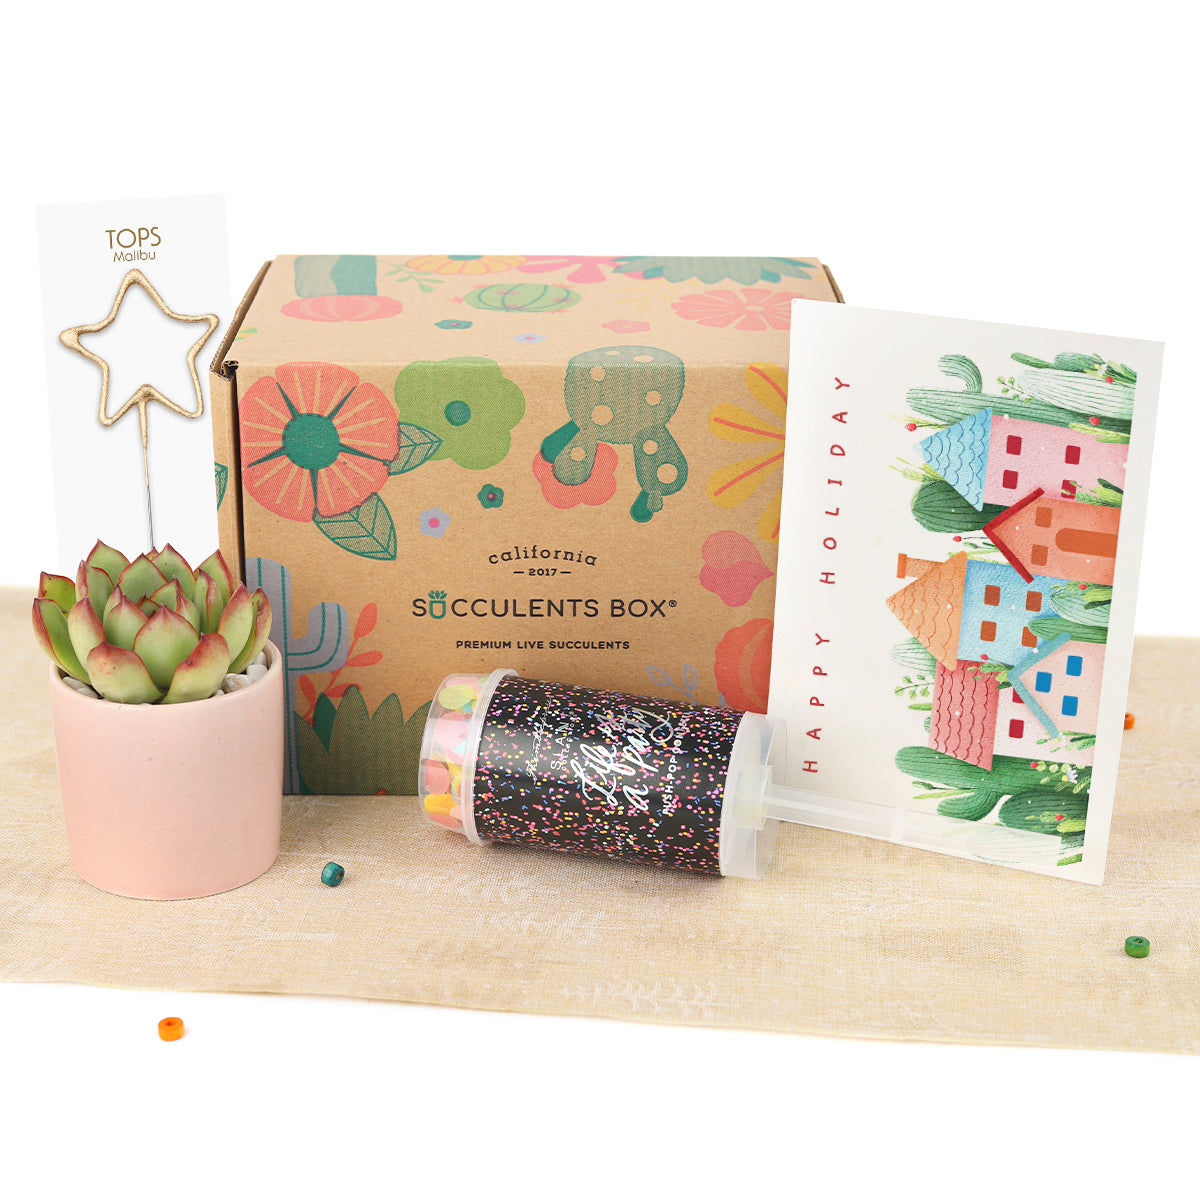 Holiday Gift Box - 1 Succulent 1 Sparkler and 1 Confetti Popper